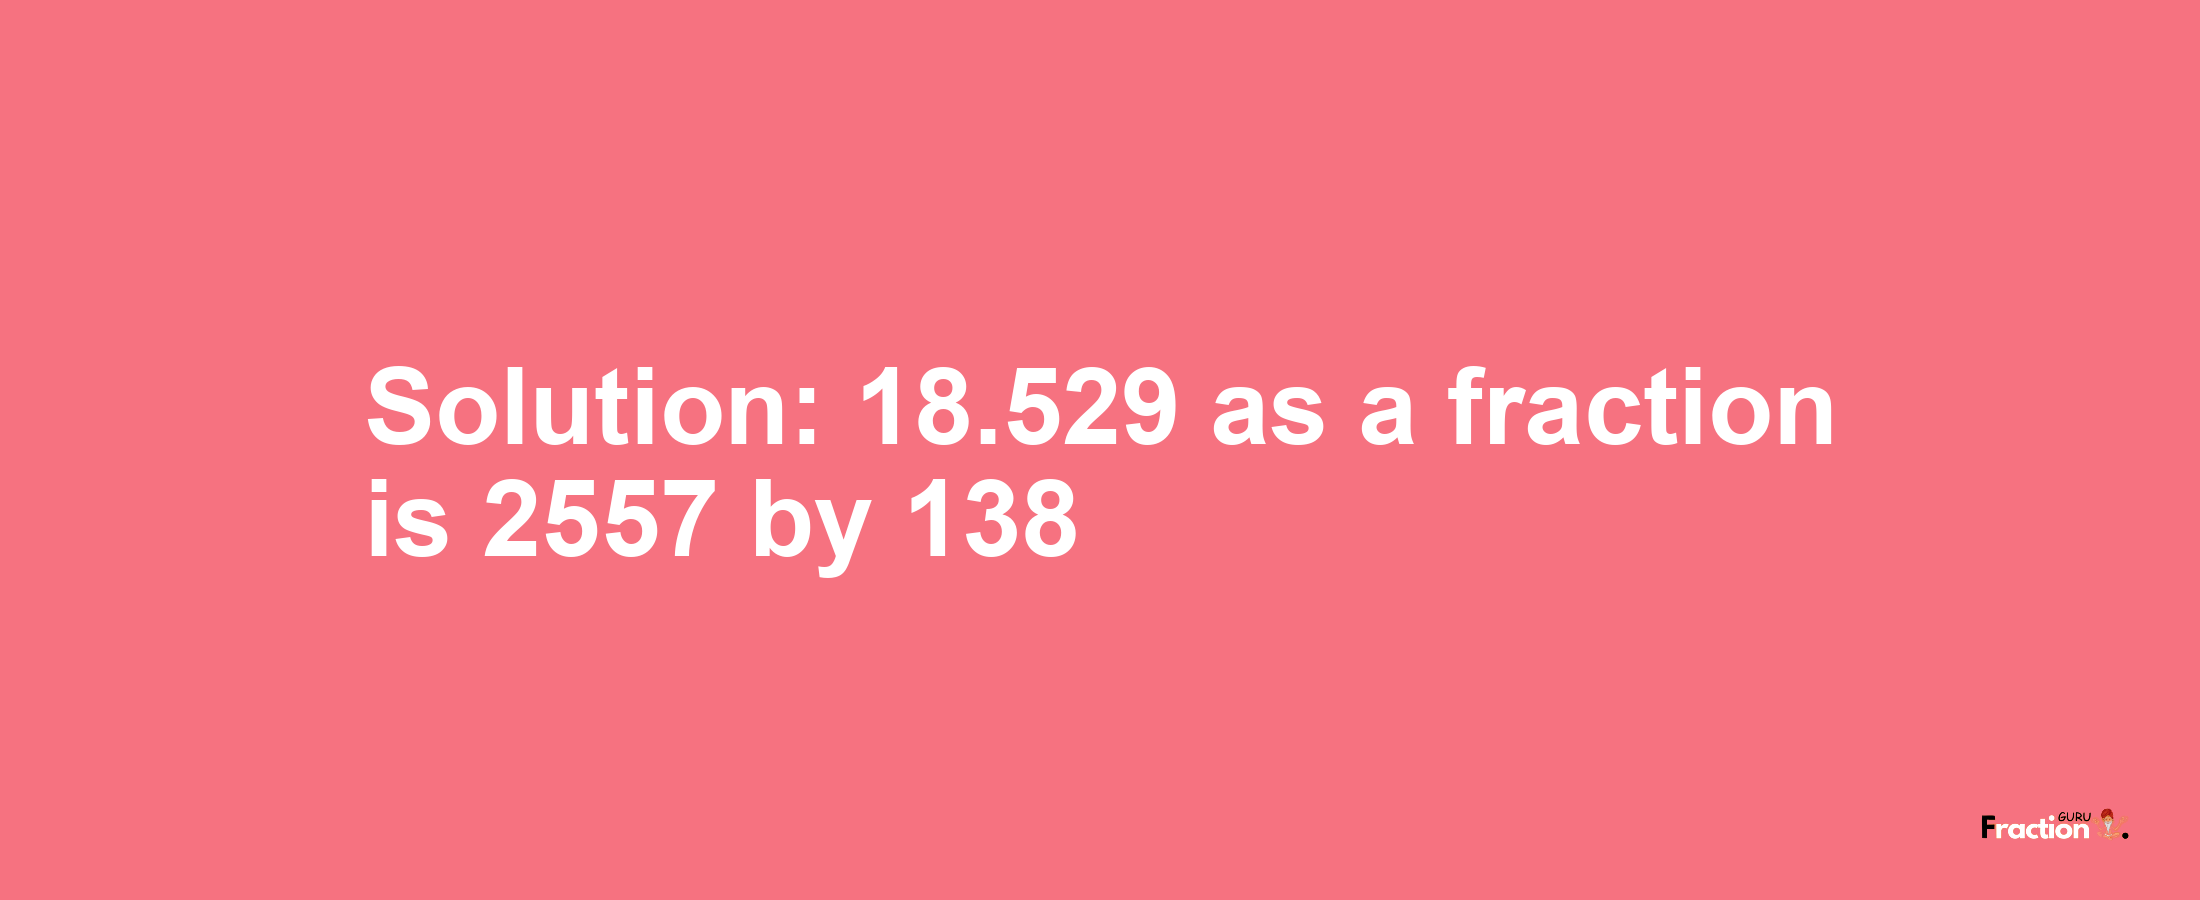 Solution:18.529 as a fraction is 2557/138